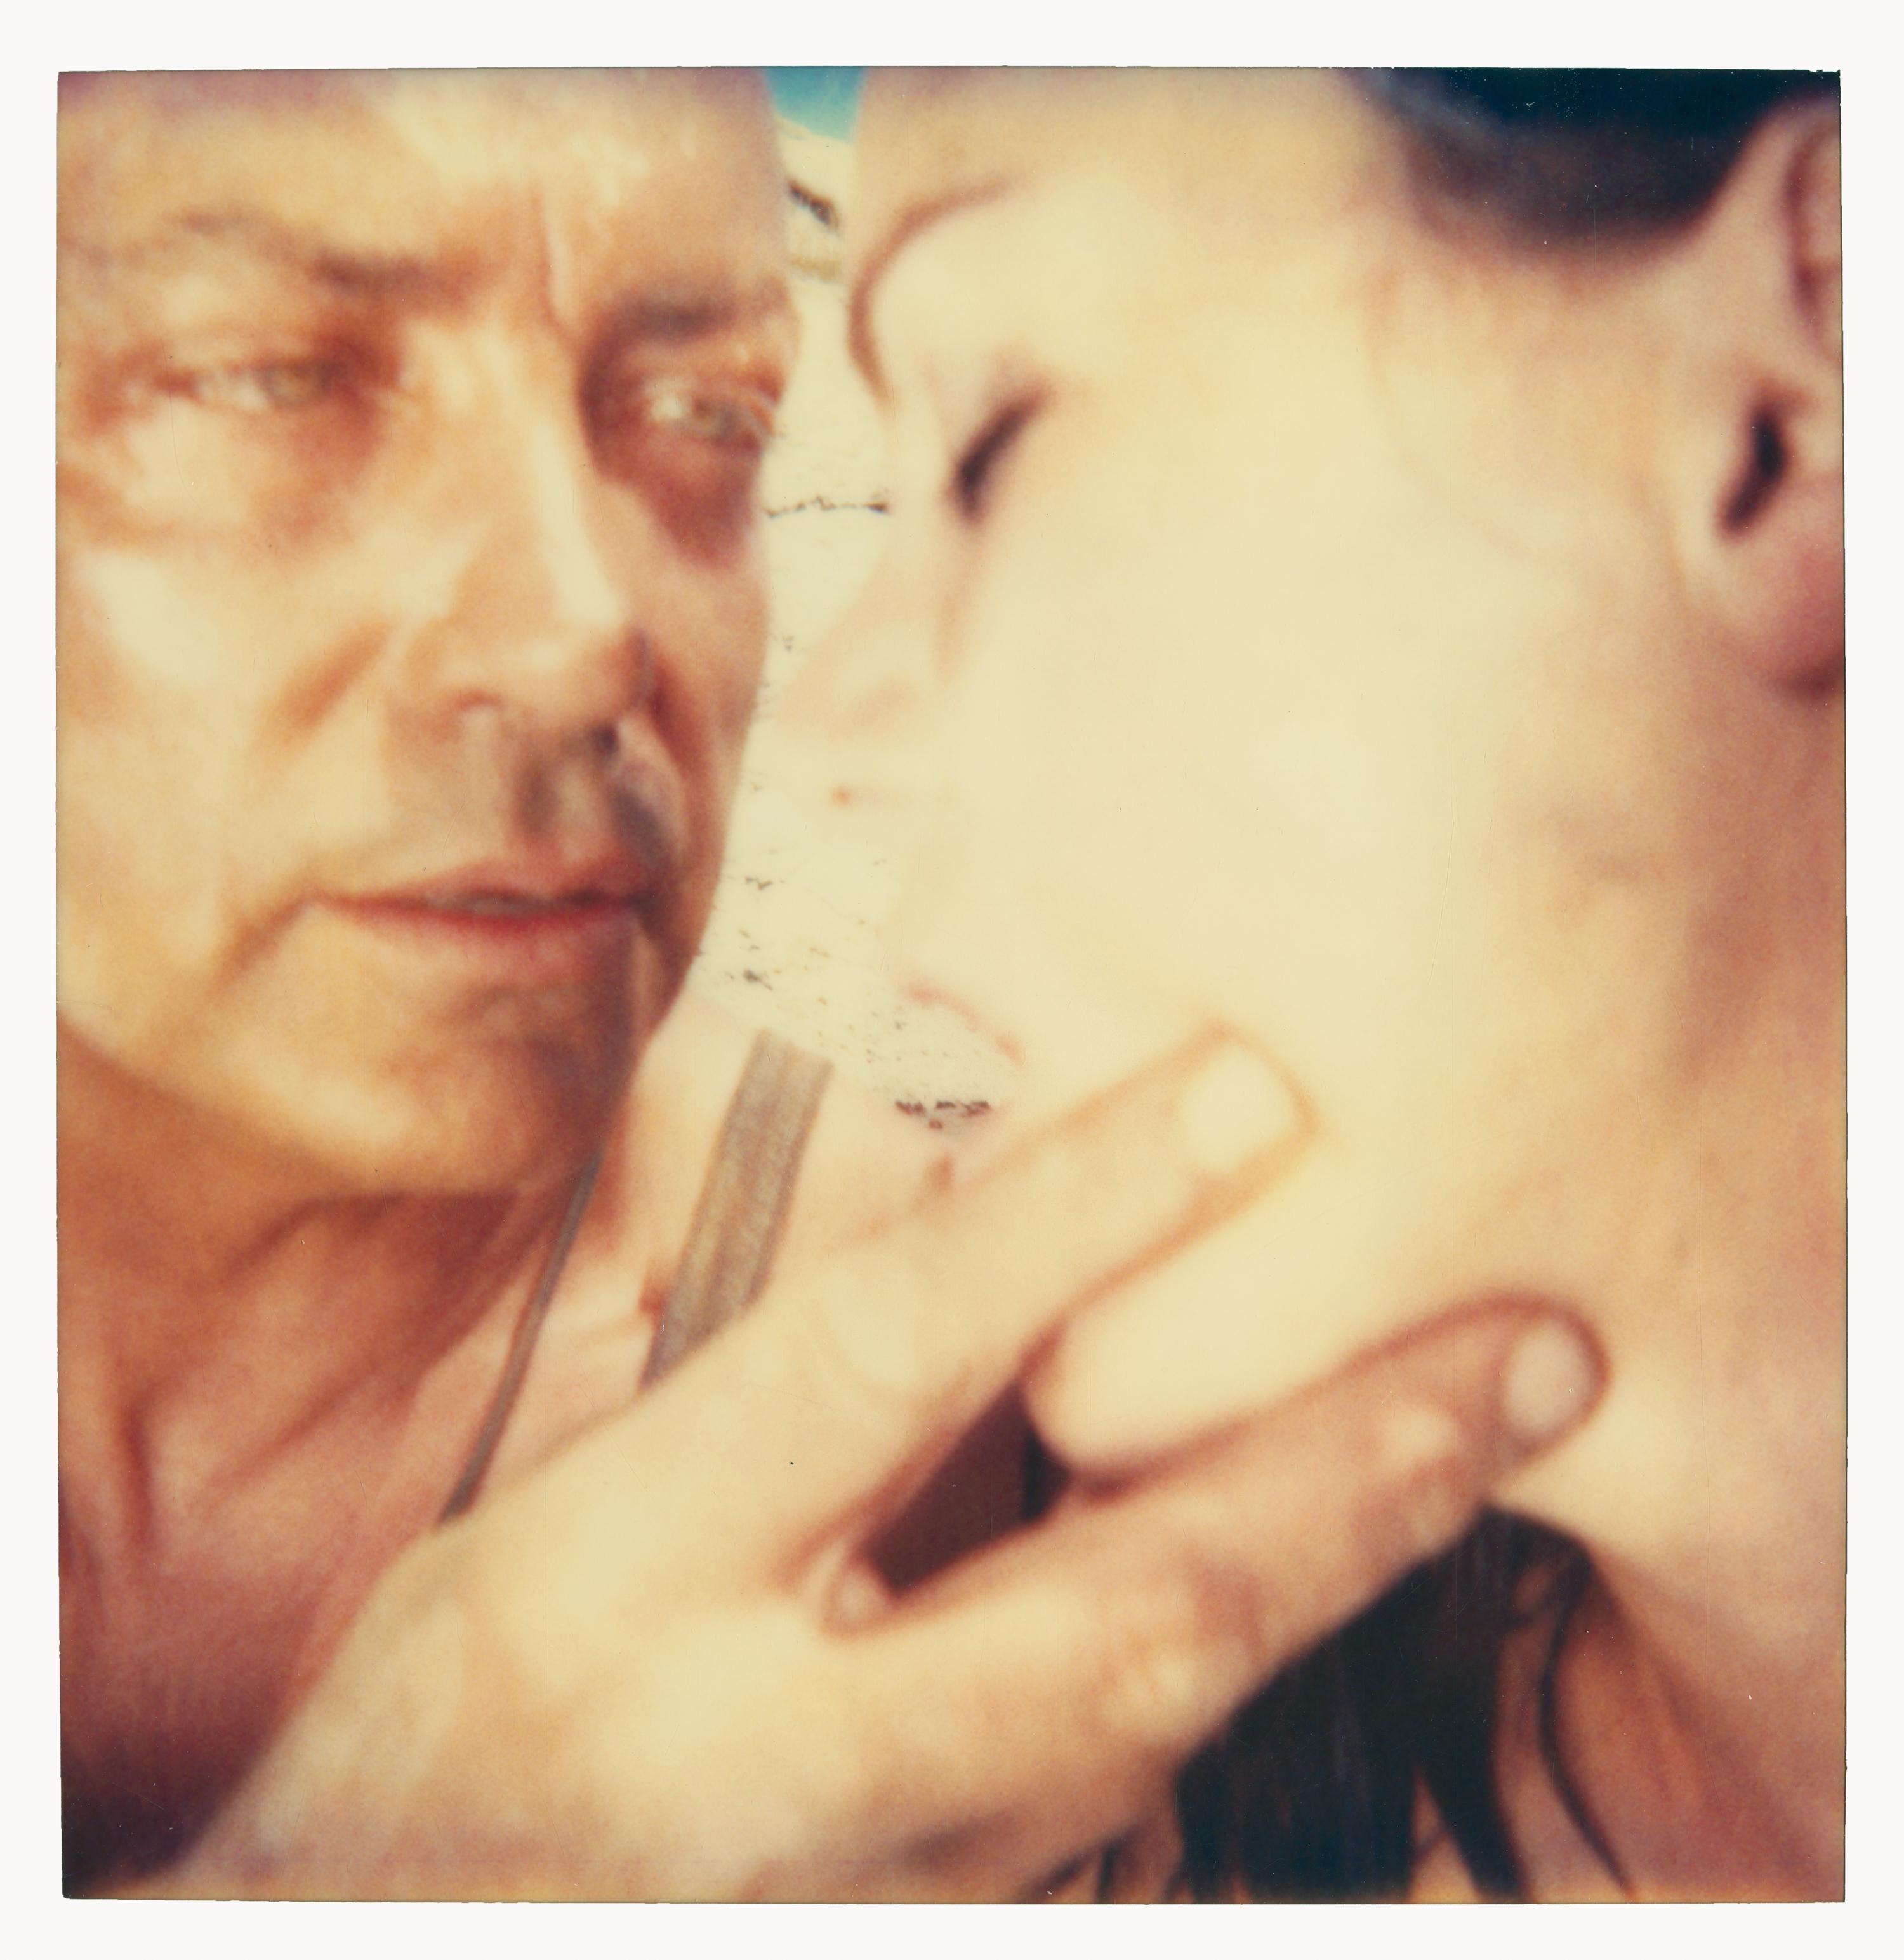 Hans and Penelope (Immaculate Springs) starring Udo Kier and Jacinda Barrett - Contemporary Photograph by Stefanie Schneider